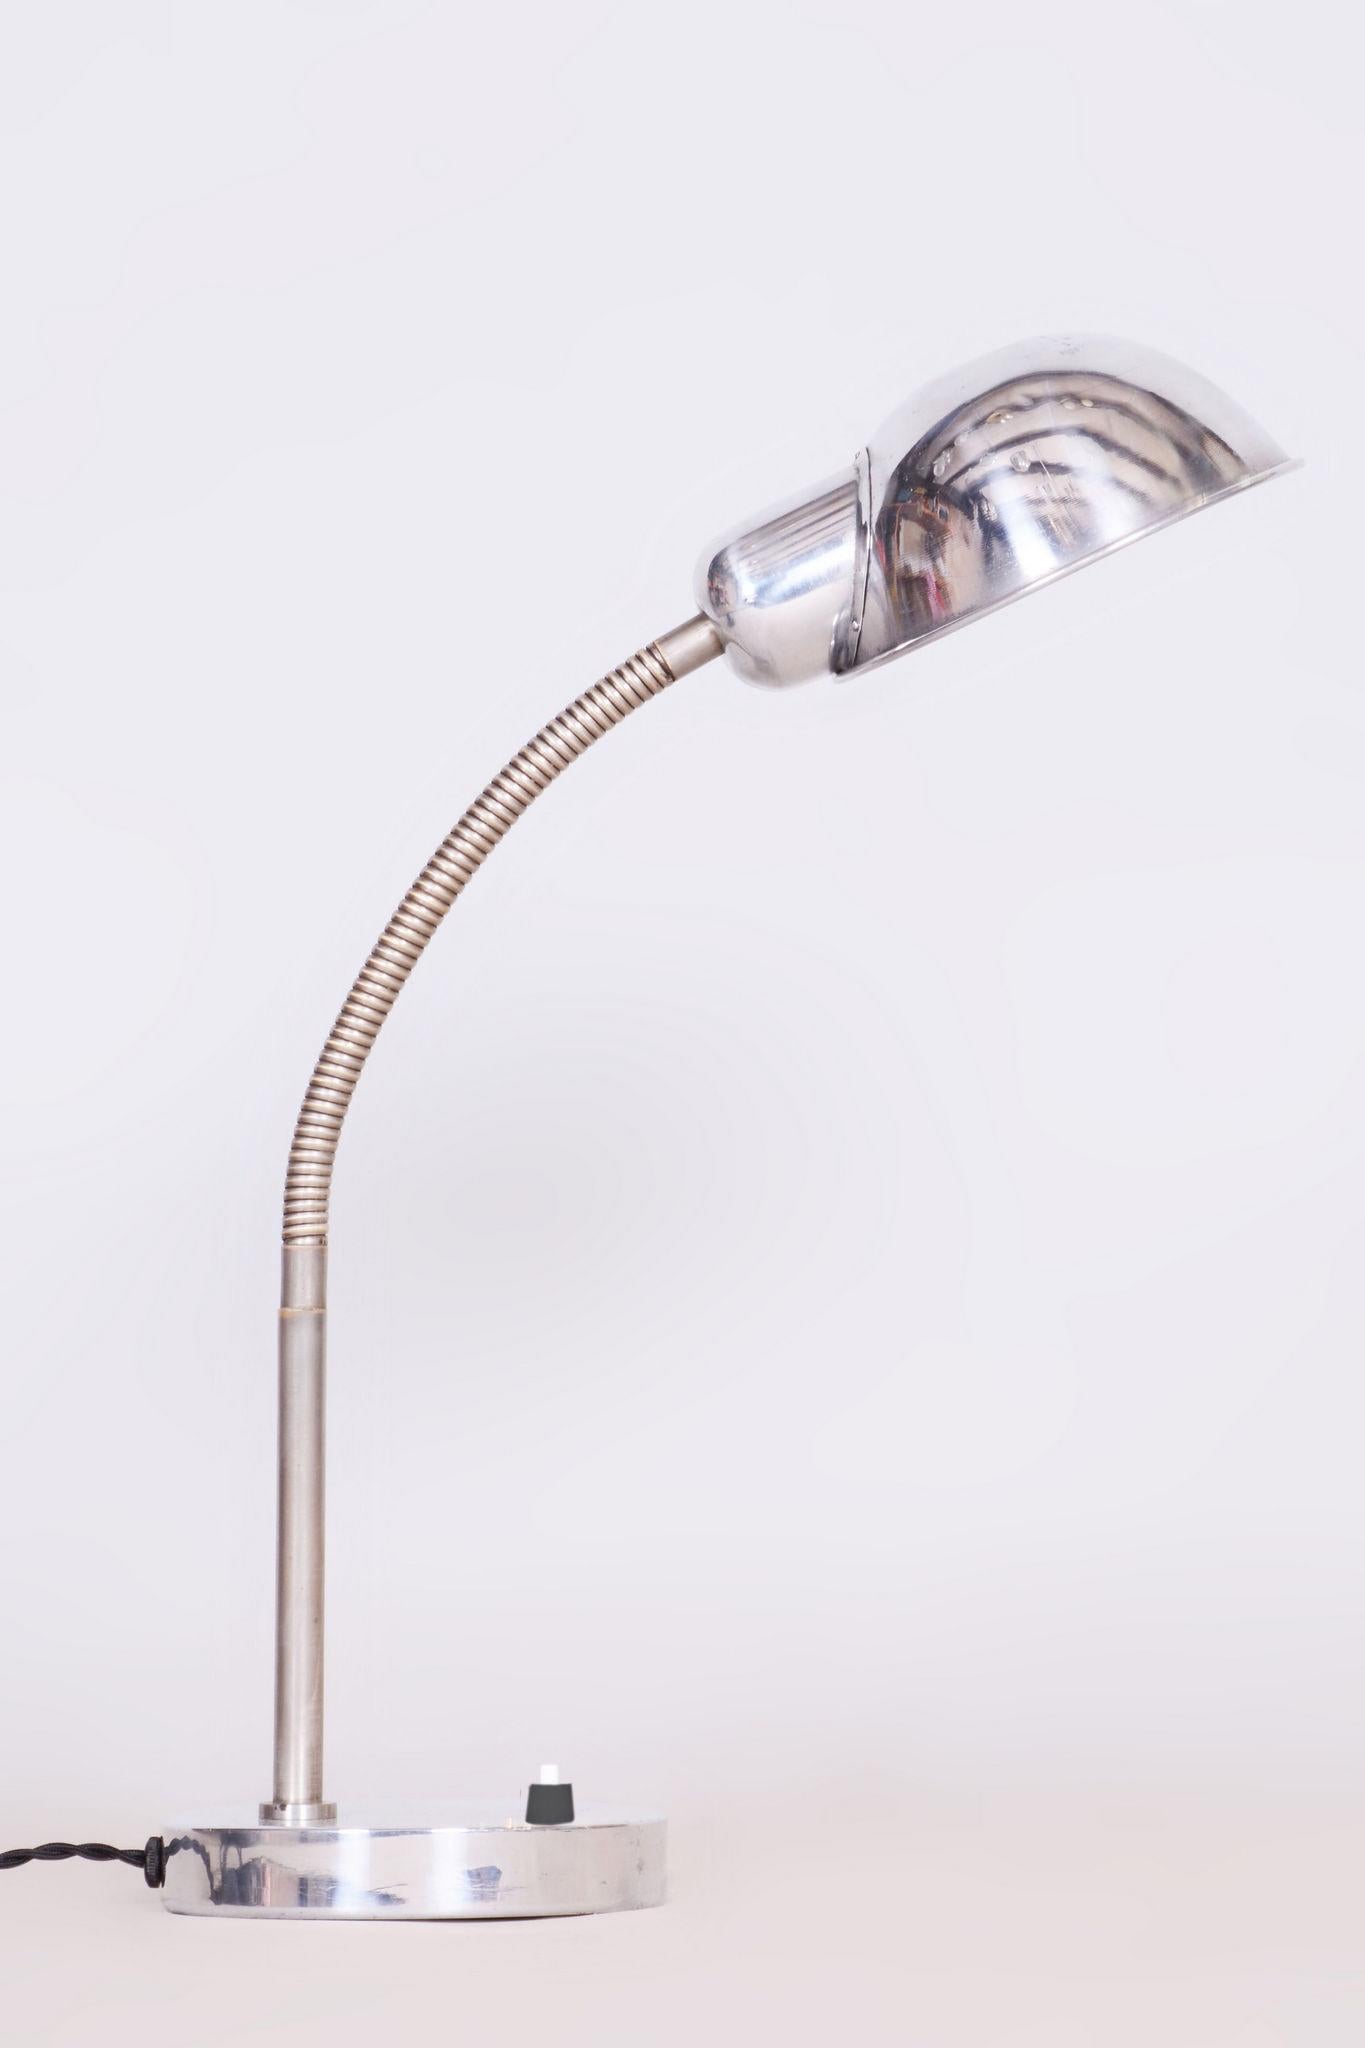 Restored Bauhaus table lamp. 

Period: 1930-1939.
Material: Chrome-plated steel, aluminium (lamp shade) 
Source: Czechia

The chrome and aluminium parts have been cleaned, polished and professionally restored. Our professional refurbishing team in